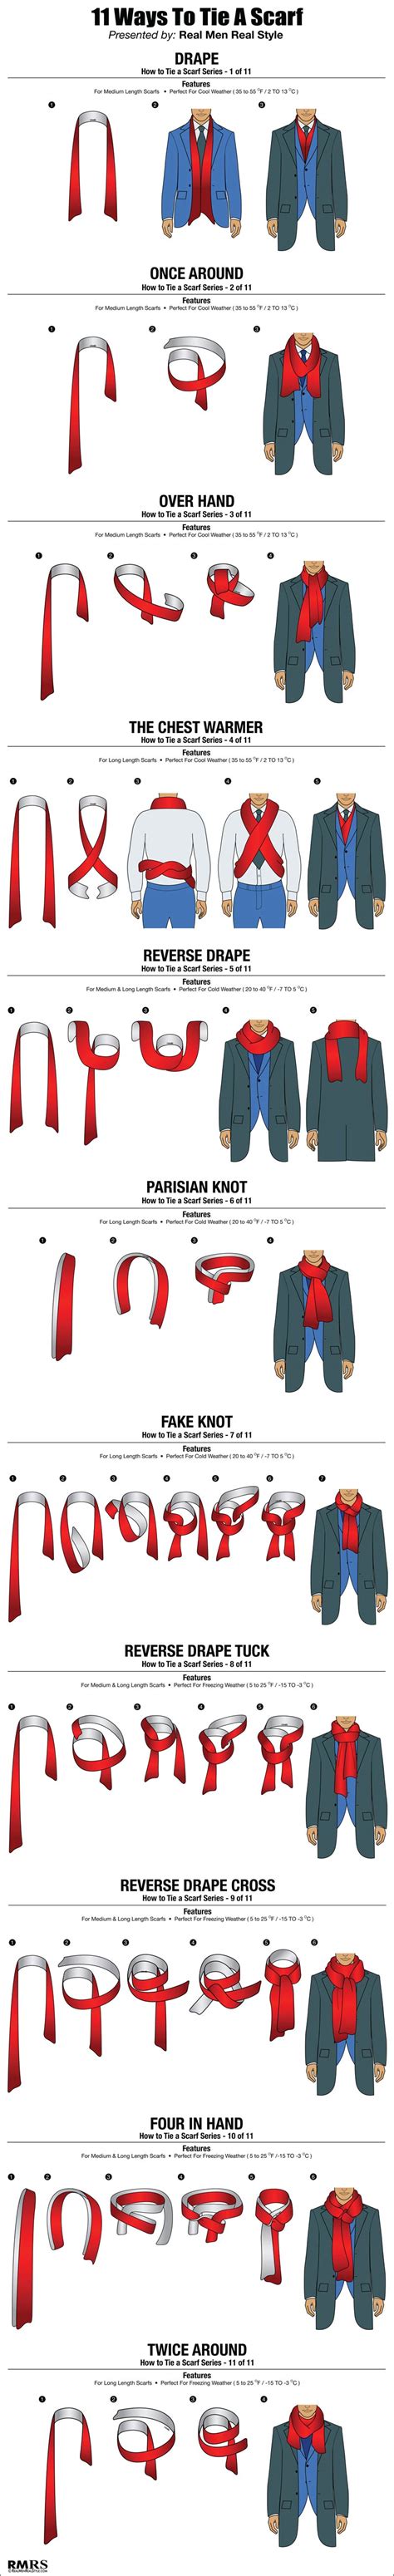 How to tie mens scarf. How To Tie A Scarf Chart | 11 Masculine Ways To Tie Scarves